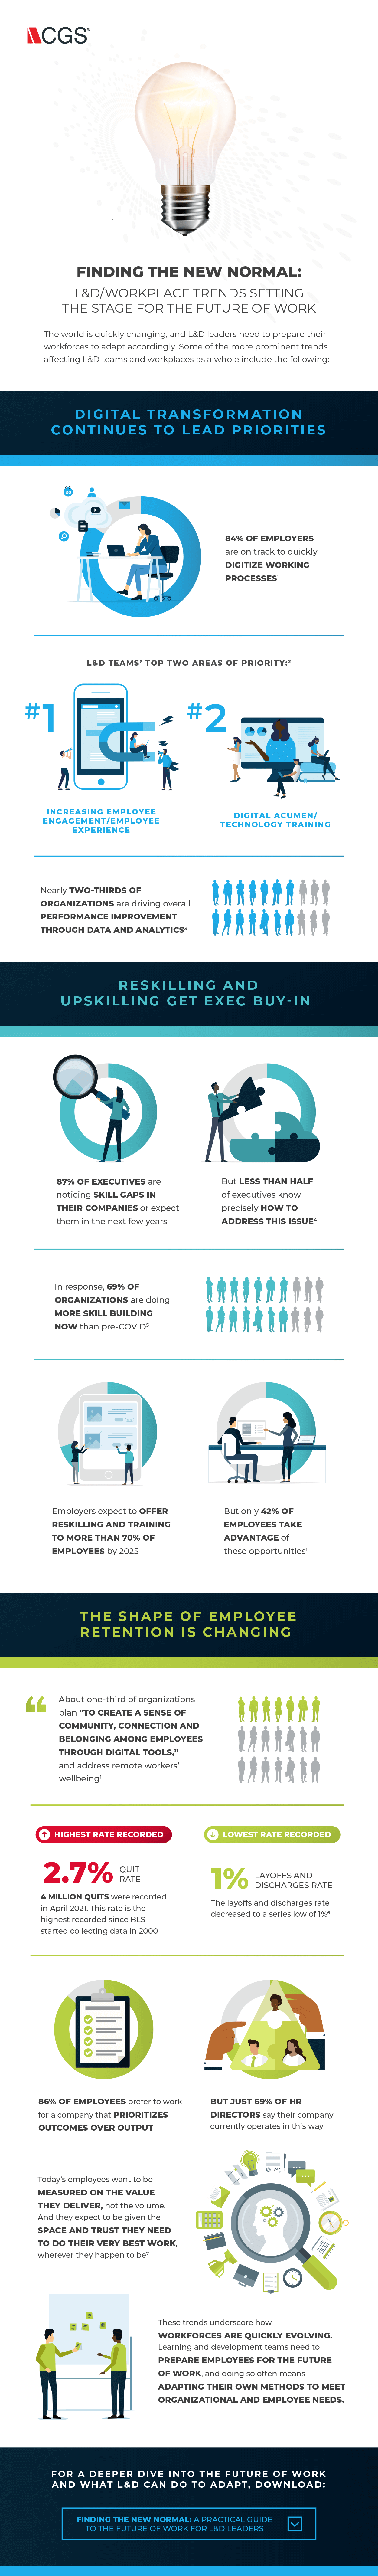 Future of Workplace infographic